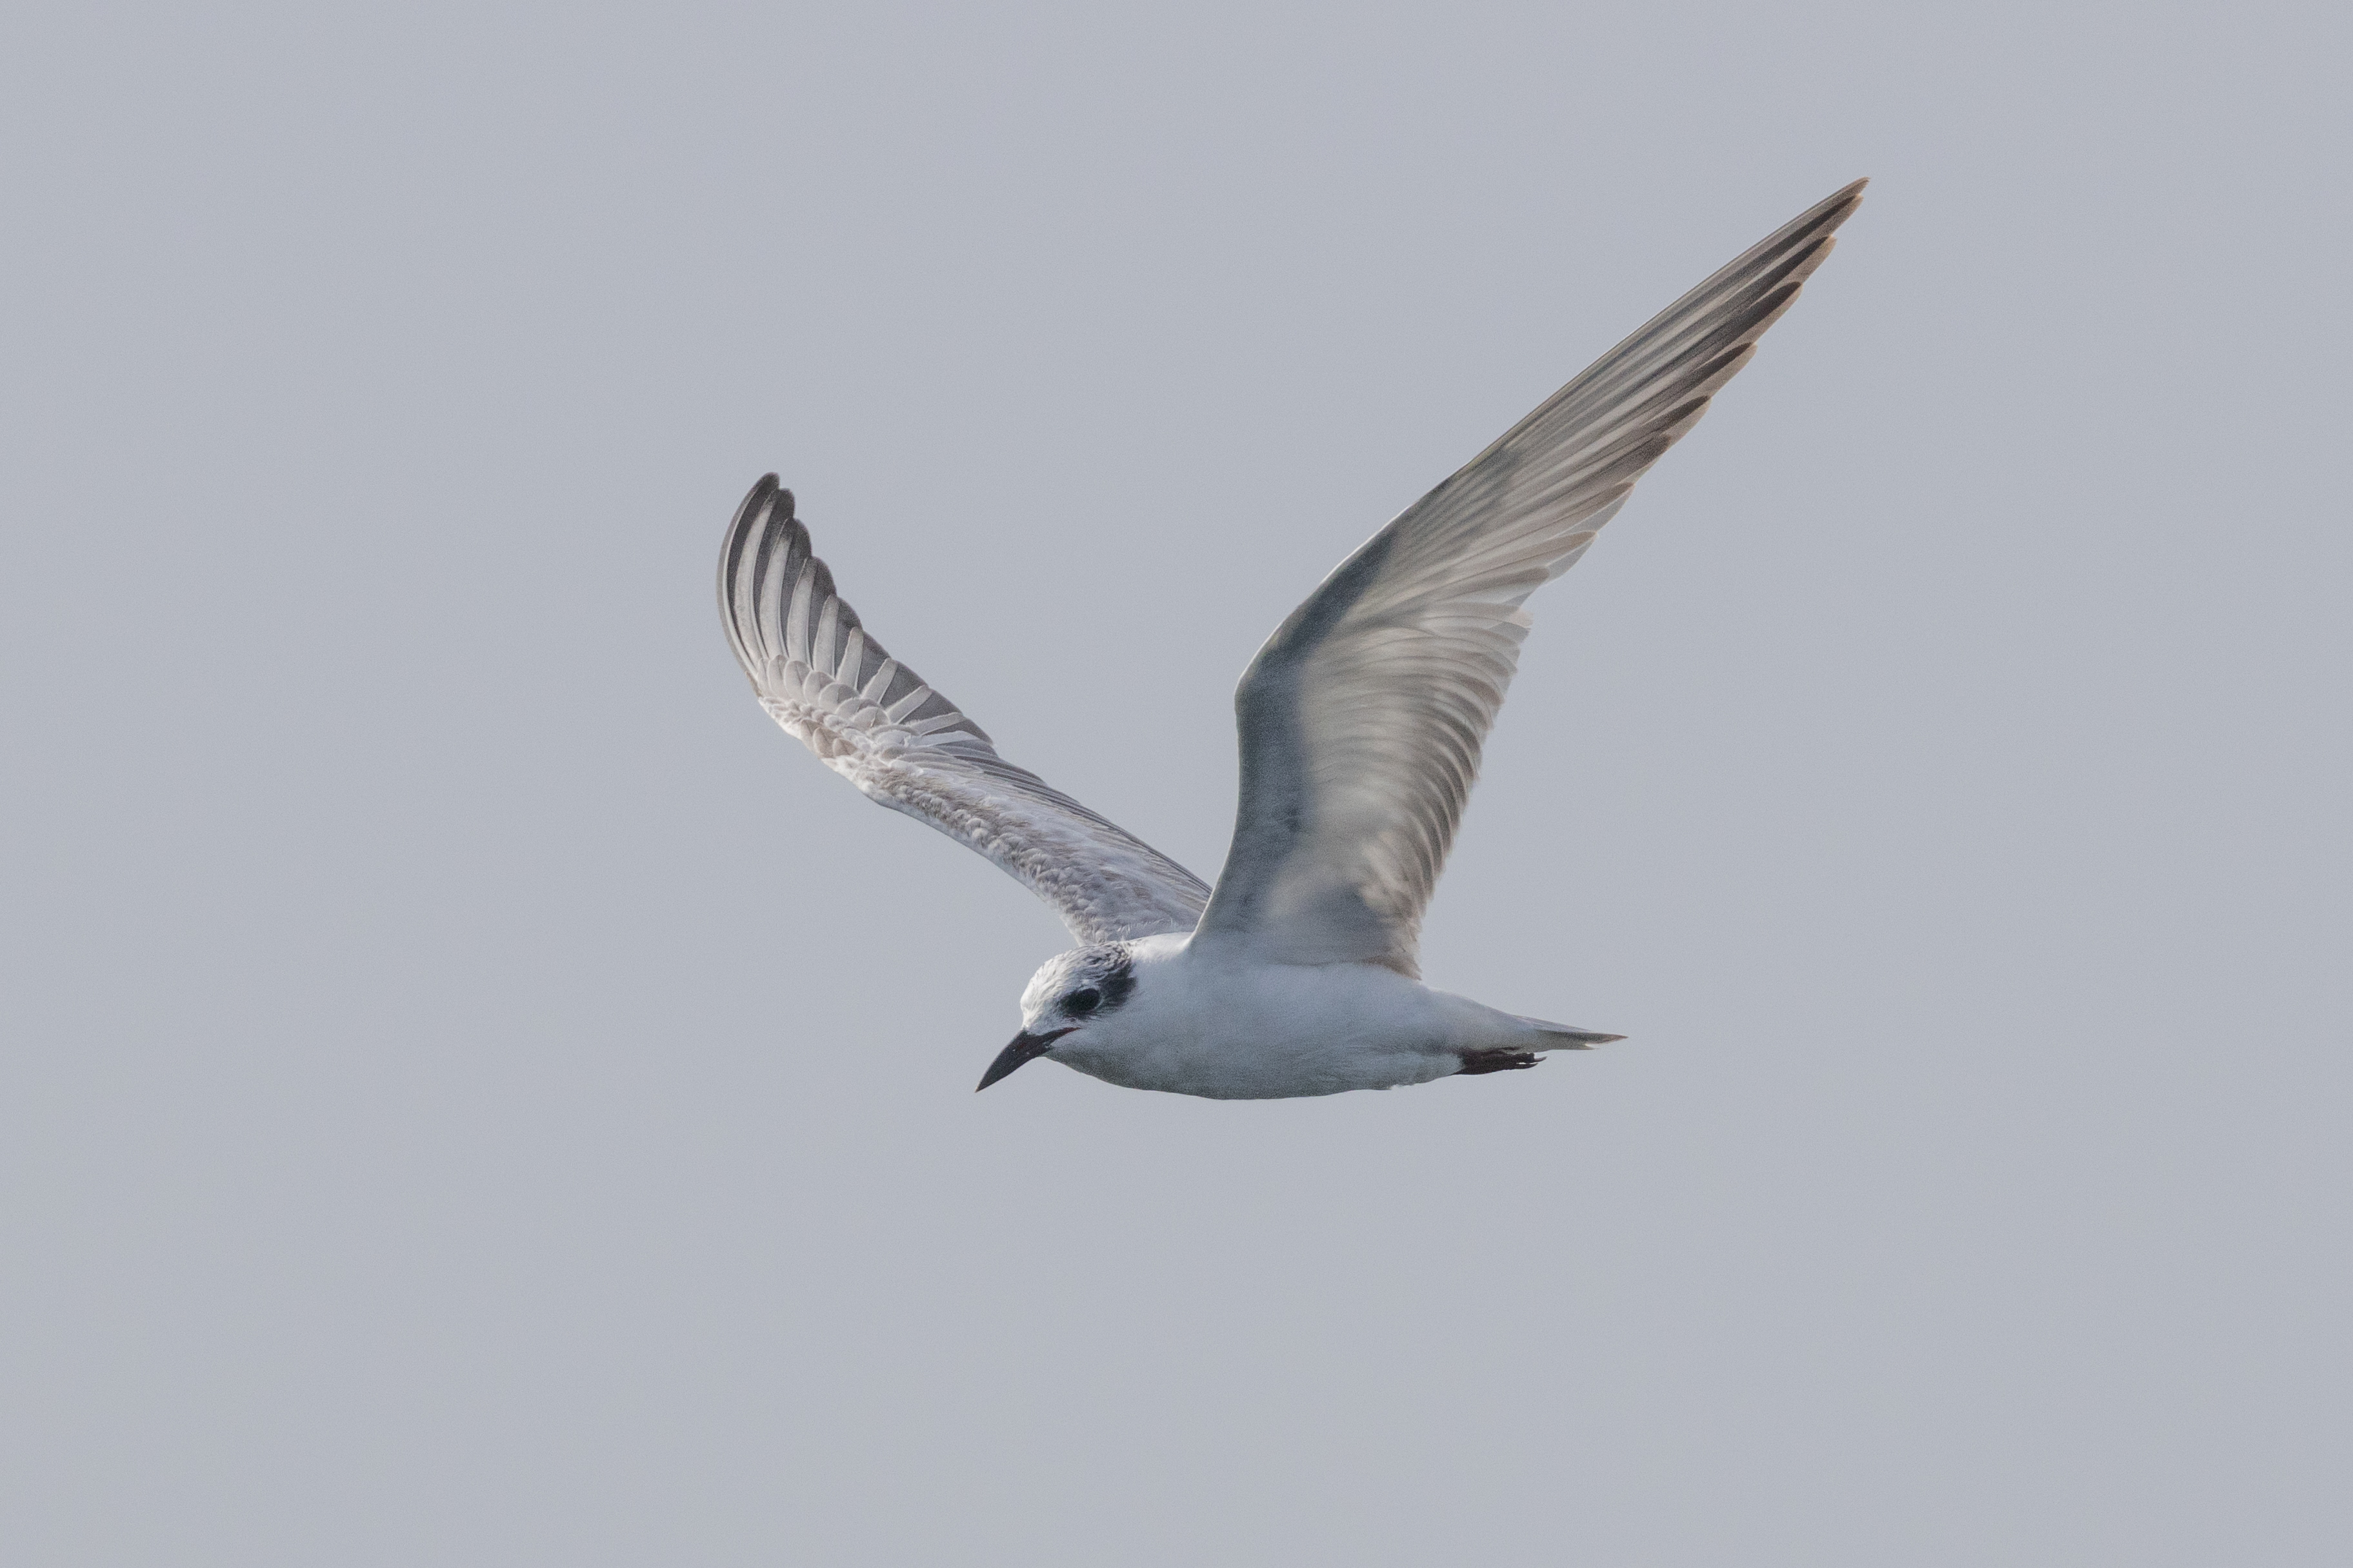 Whiskered Tern on Singapore Straits on 29 Apr 2023. Photo credit: Yip Jen Wei